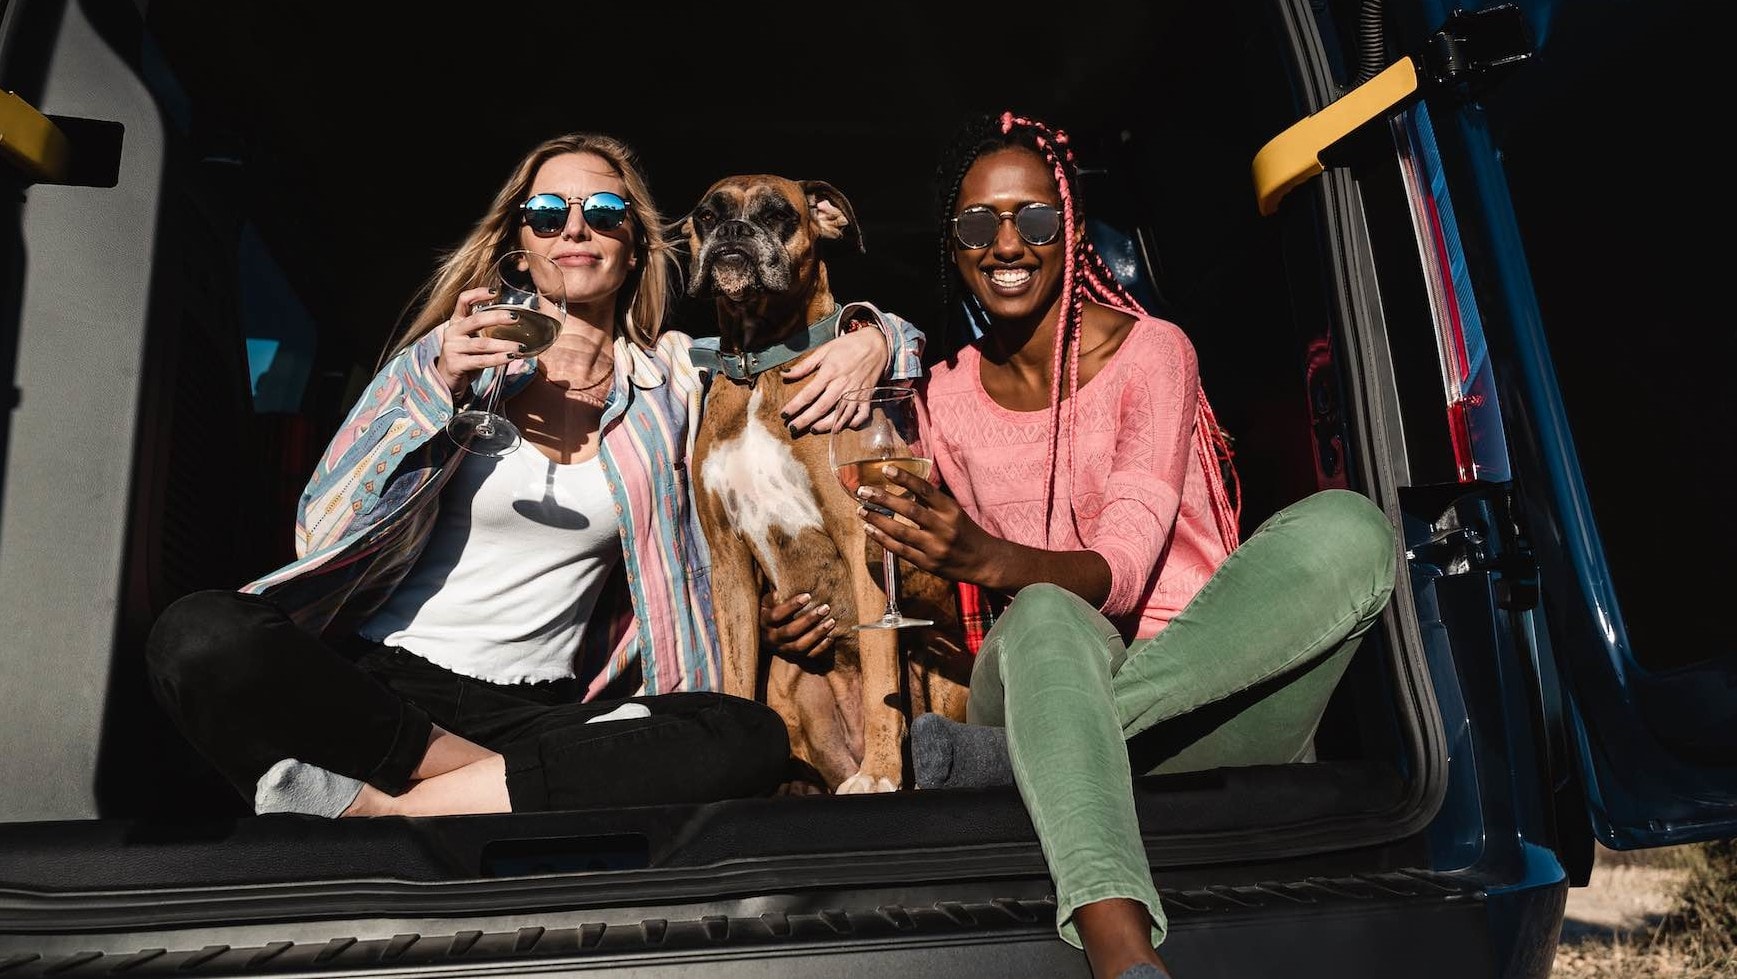 Two women with dog celebrating with wine together in camper van.